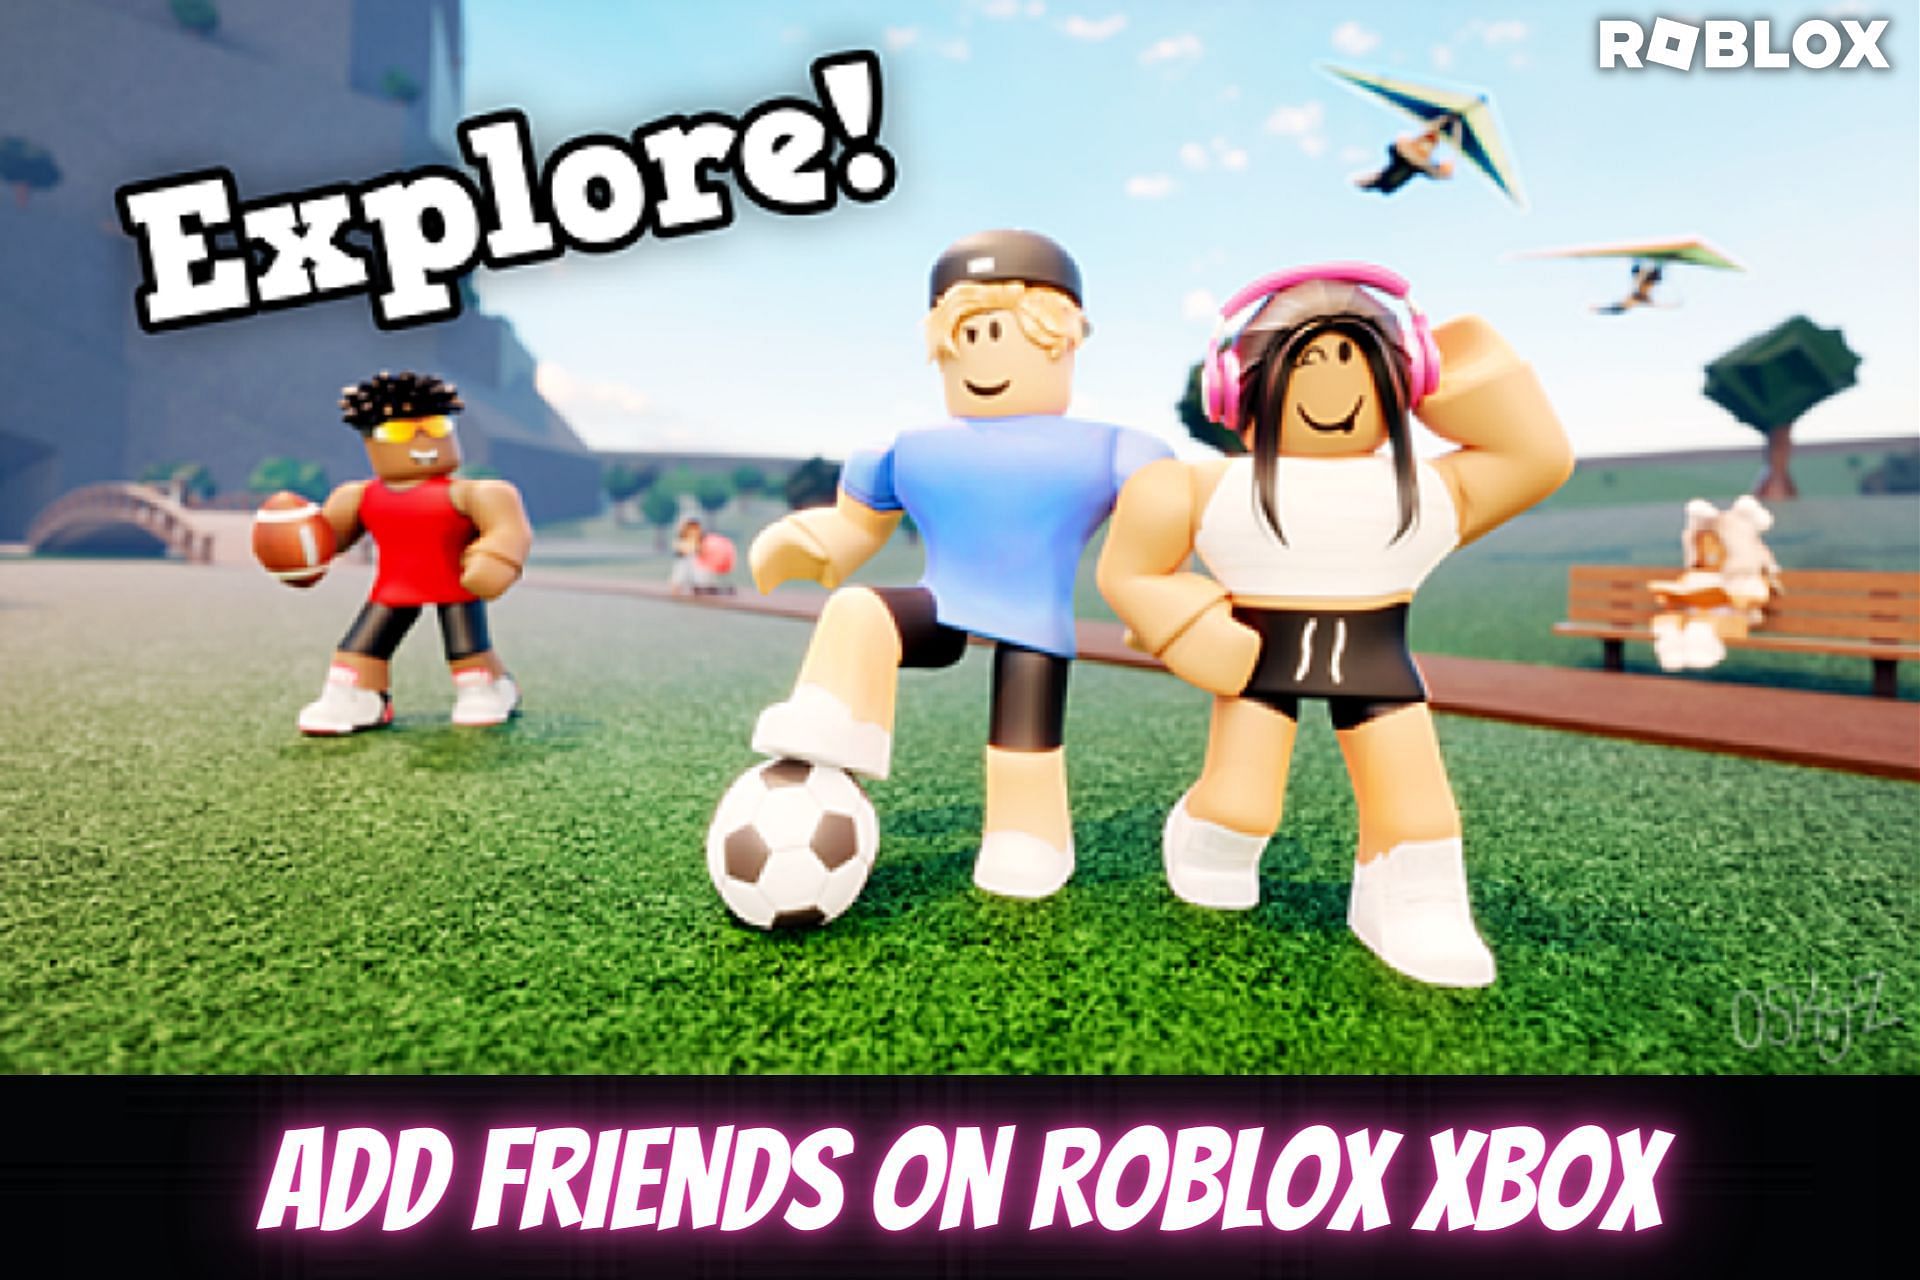 Connect with friends on Roblox Xbox (Image via Roblox)